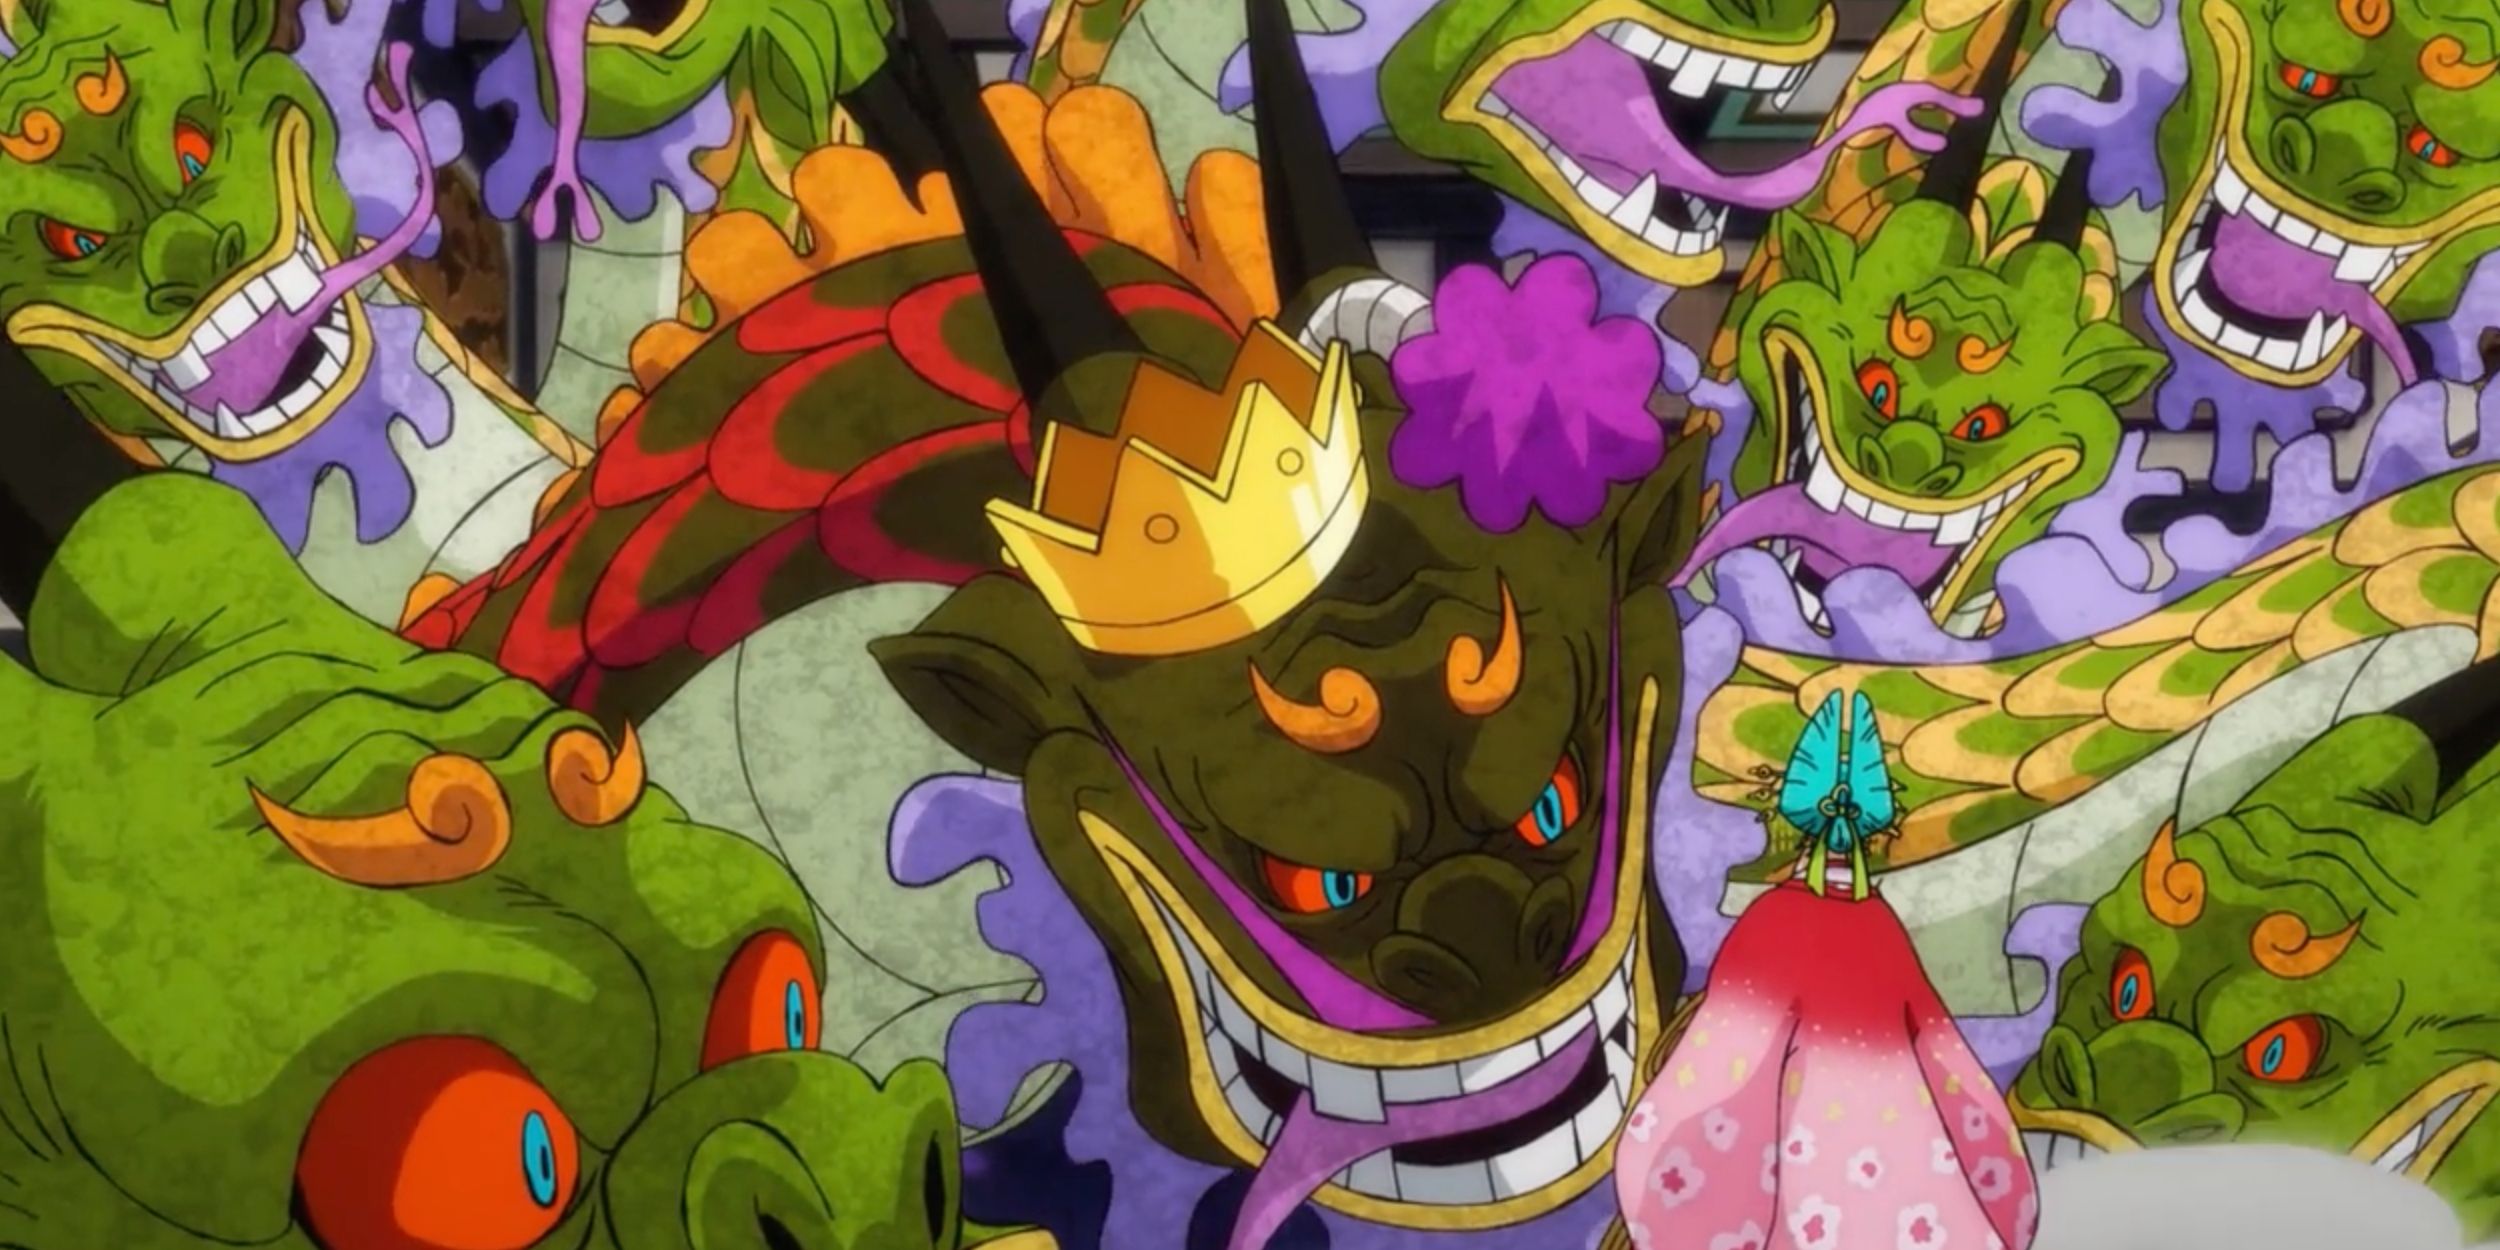 During One Piece, Orochi surrounds Komurasaki with his multiple snake heads